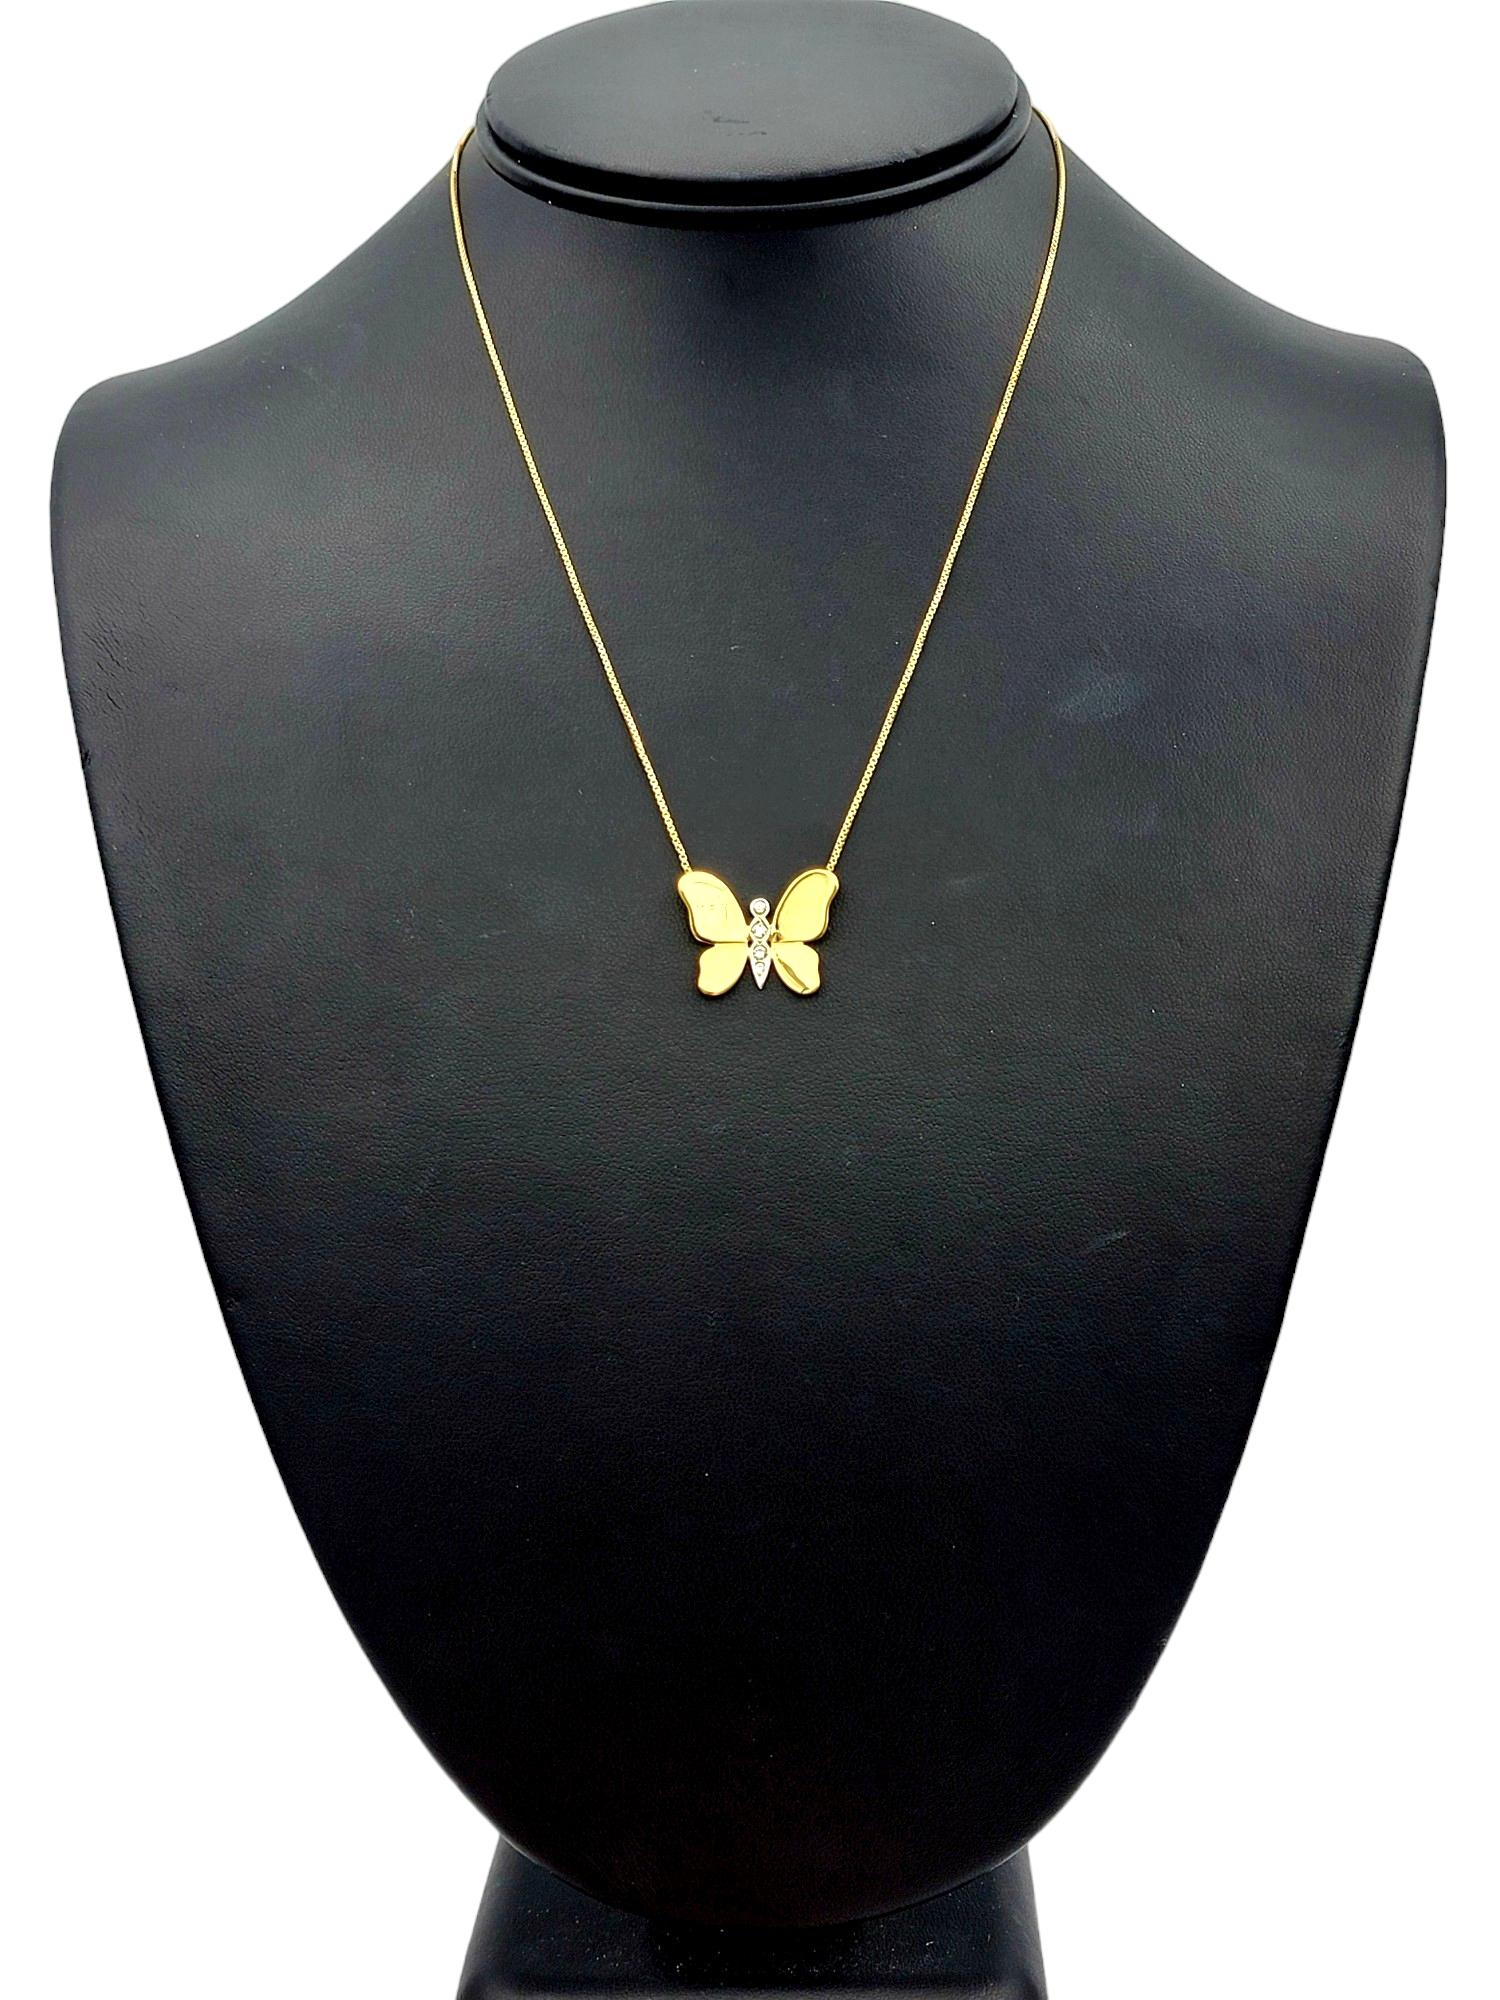 Butterfly Pendant Necklace with Diamonds Set in Polished 18 Karat Yellow Gold For Sale 2